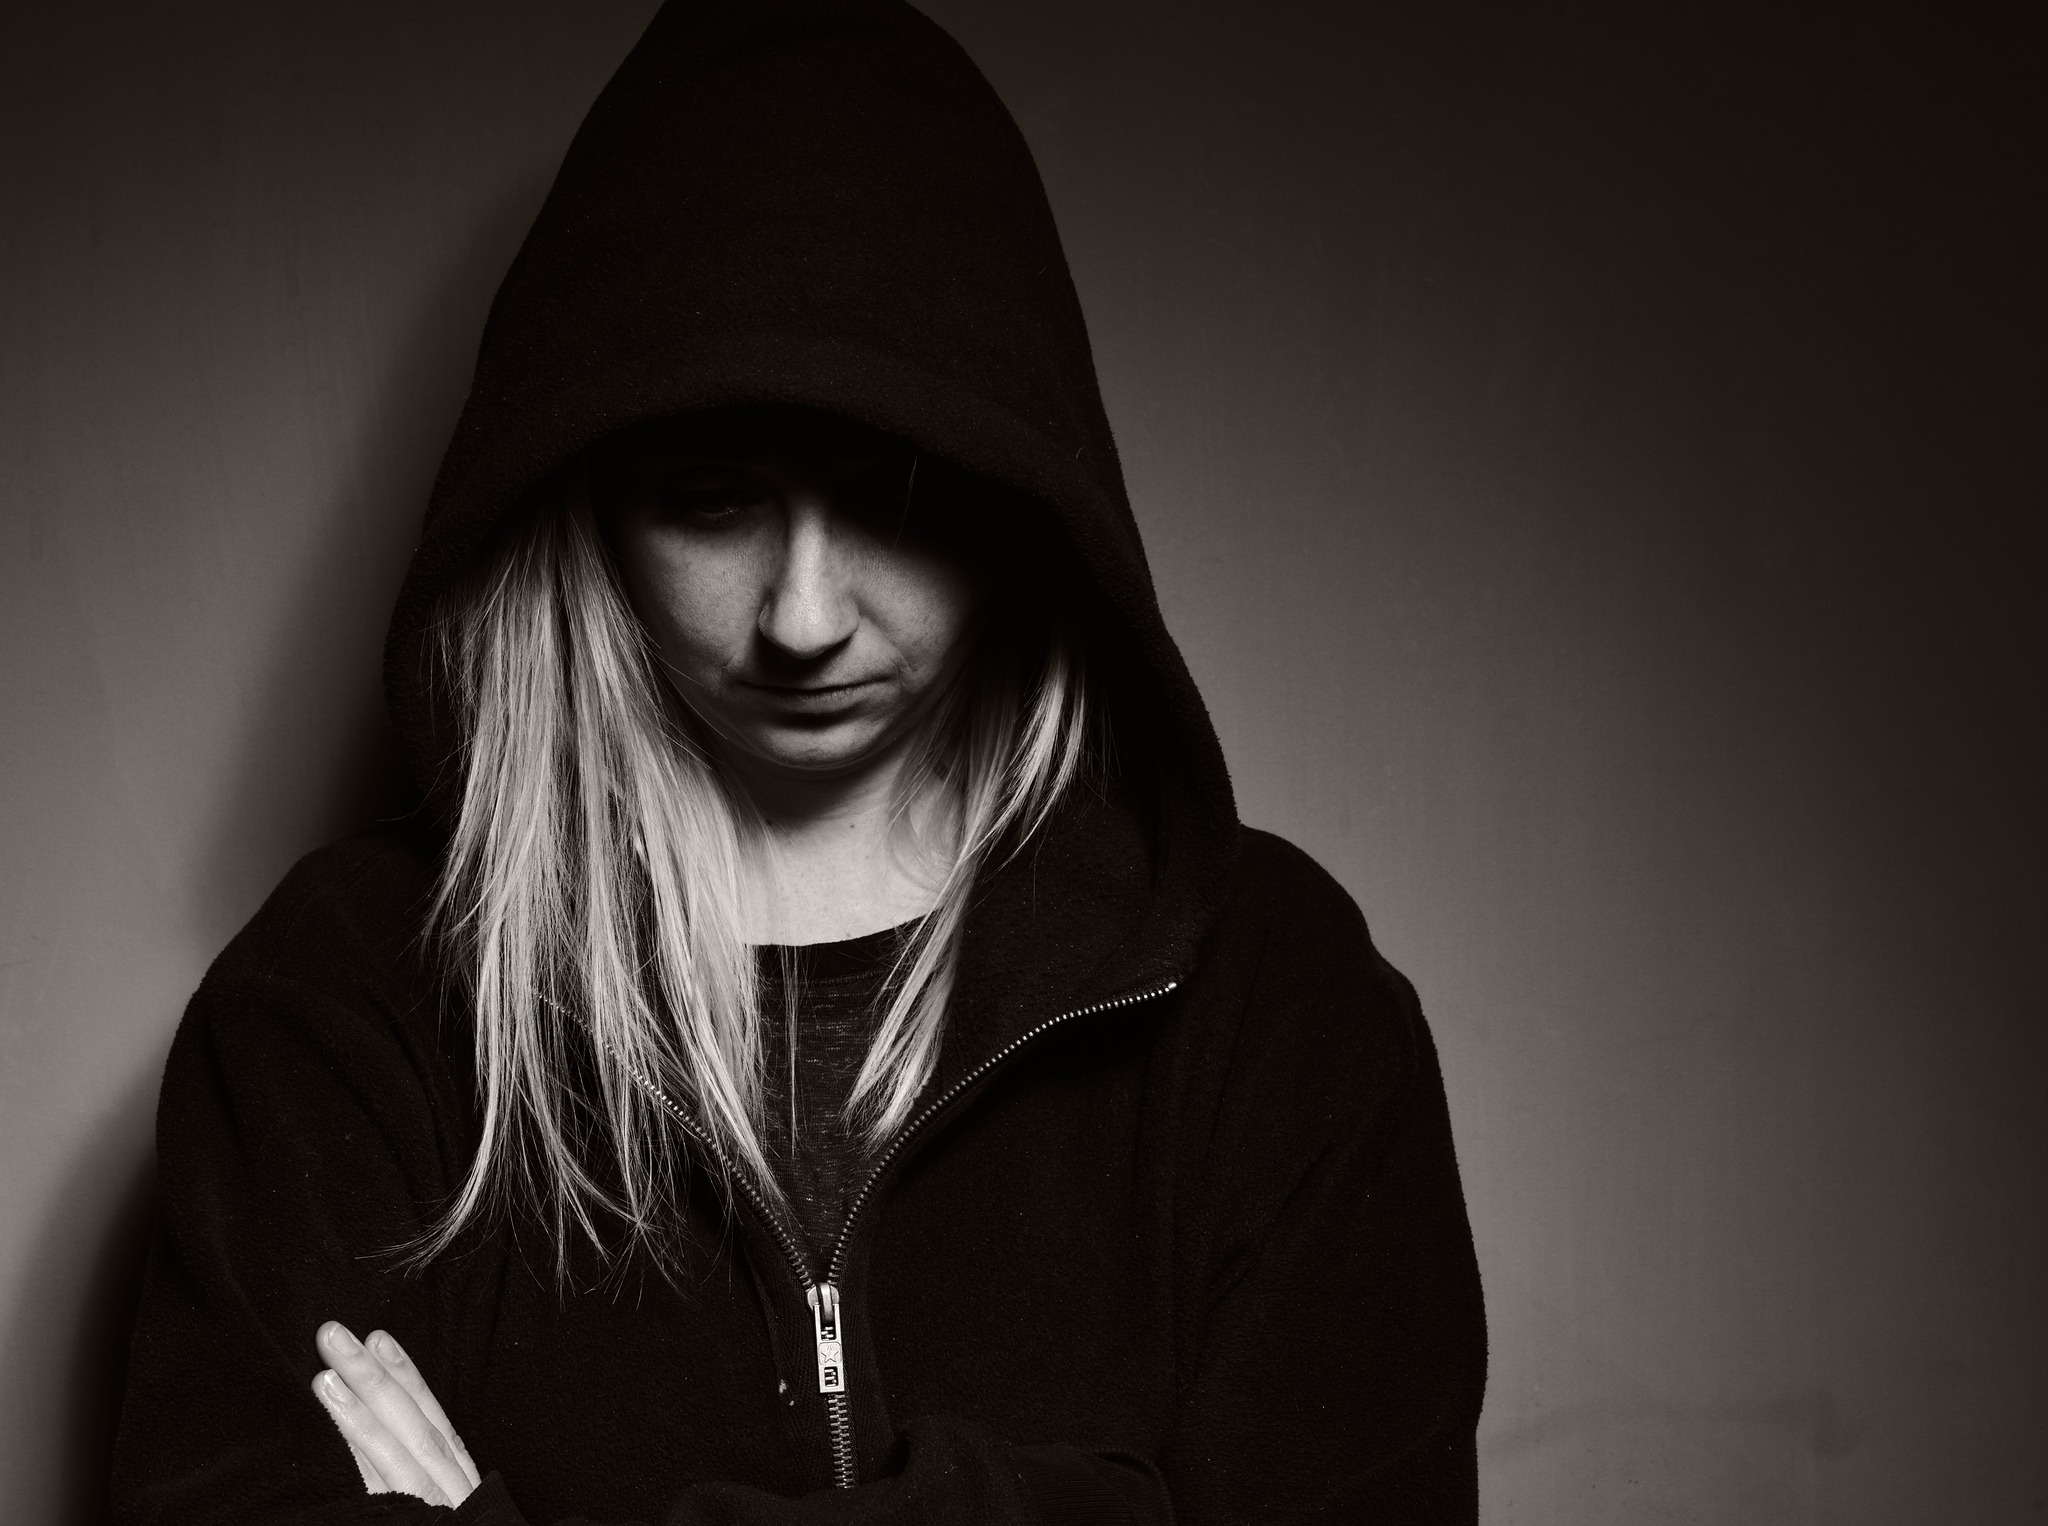 Black and white photo of a young woman looking down, wearing a black hoodie with hood covering portion of her face